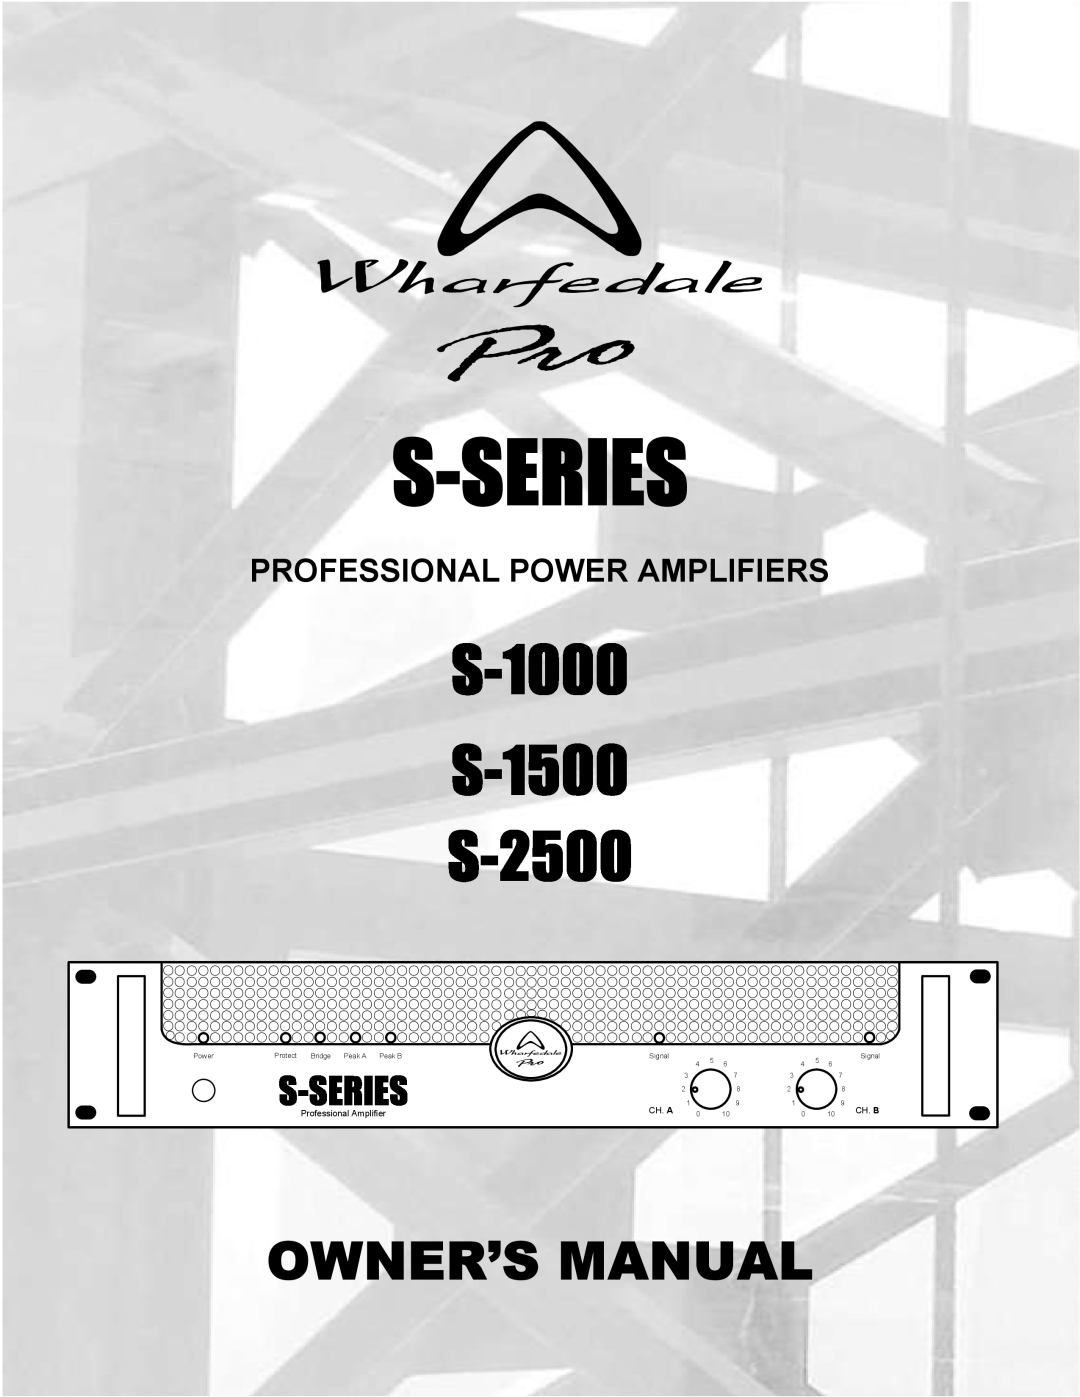 Wharfedale S-2500, S-1500, S-1000 manual Professional Power Amplifiers, Professional Amplifier, Ch. A, Ch. B 